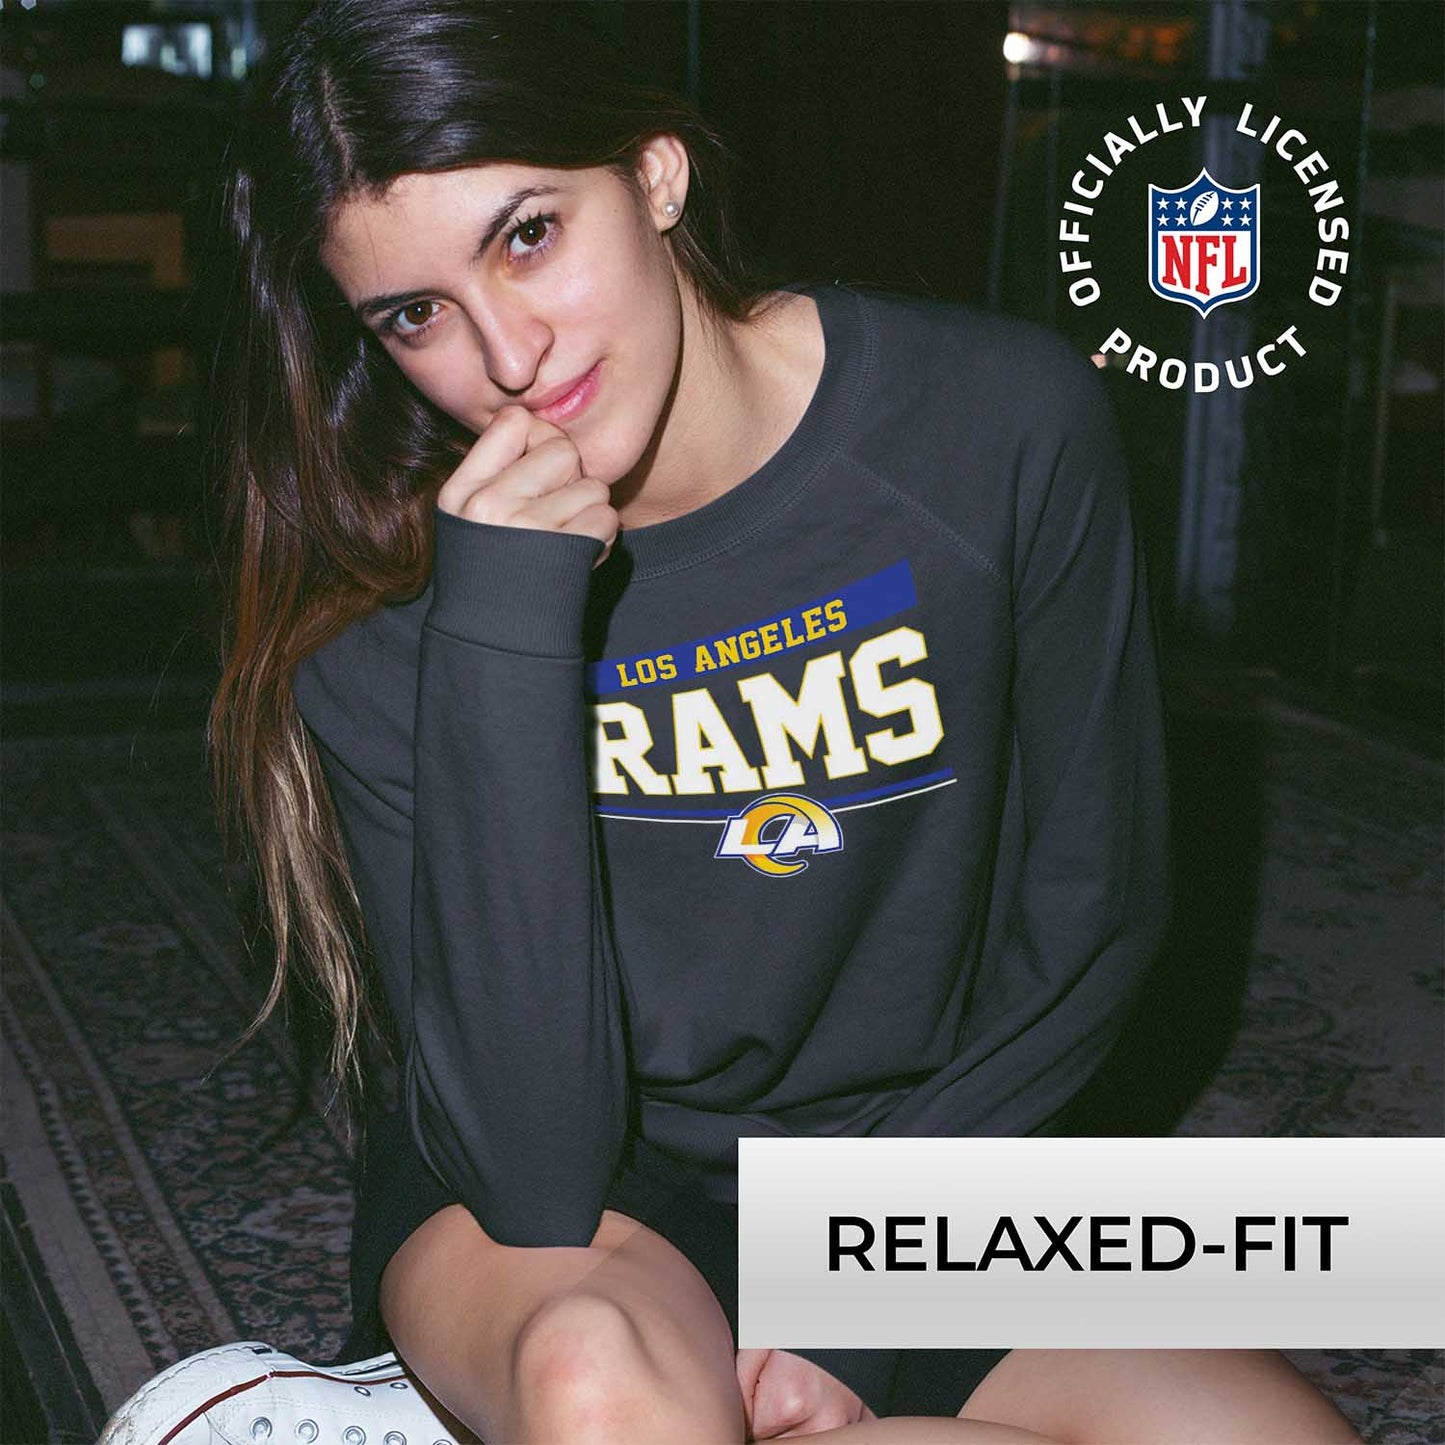 Los Angeles Rams NFL Womens Charcoal Crew Neck Football Apparel - Charcoal